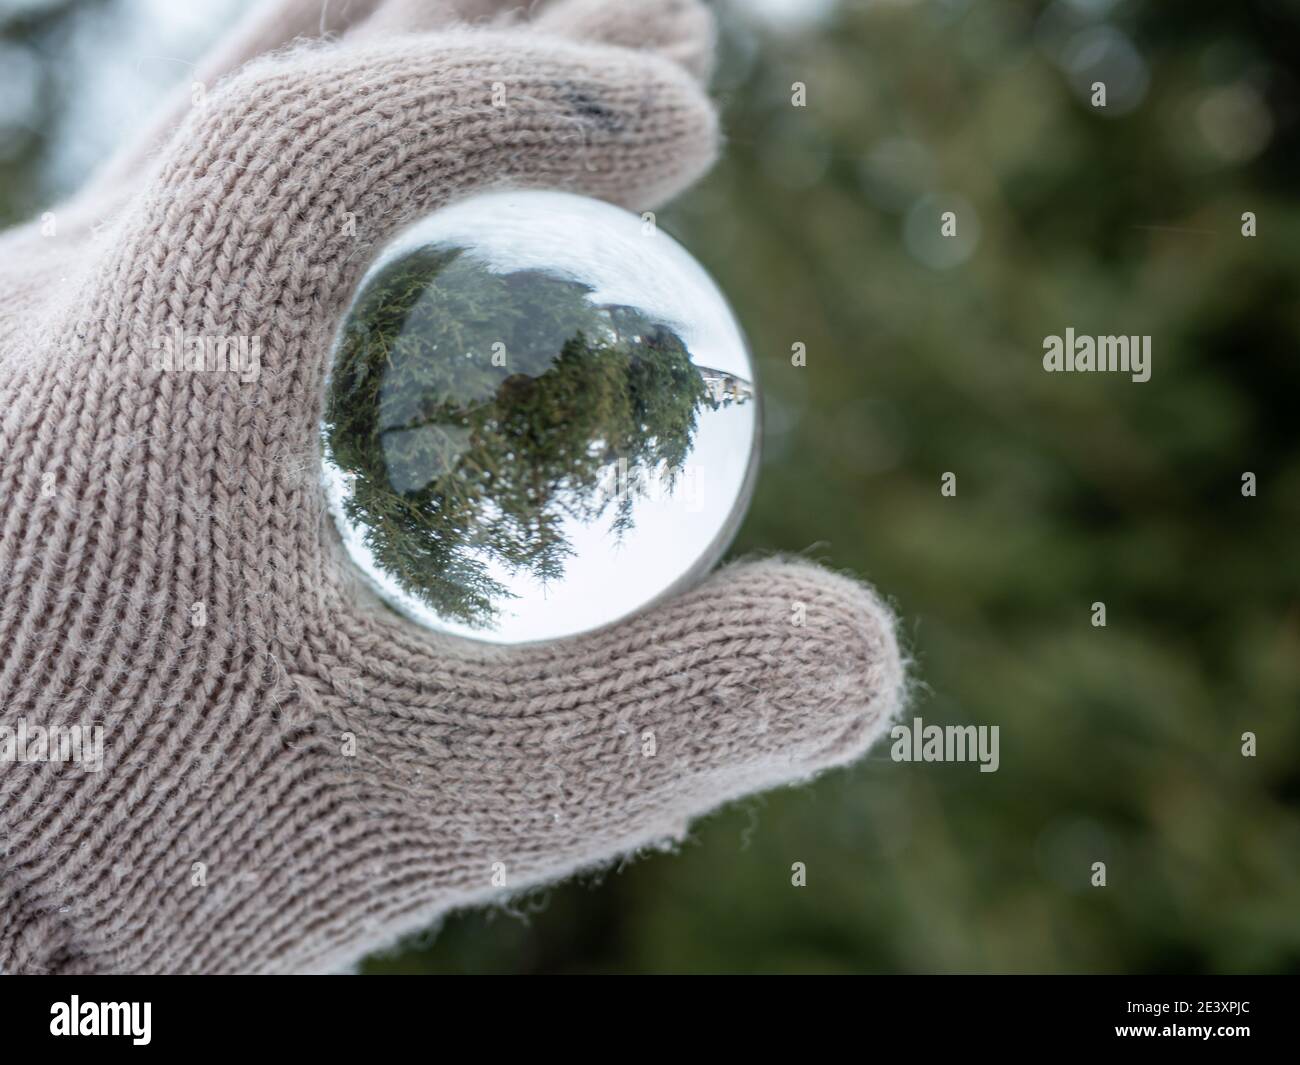 green coniferous forest in a glass ball Stock Photo